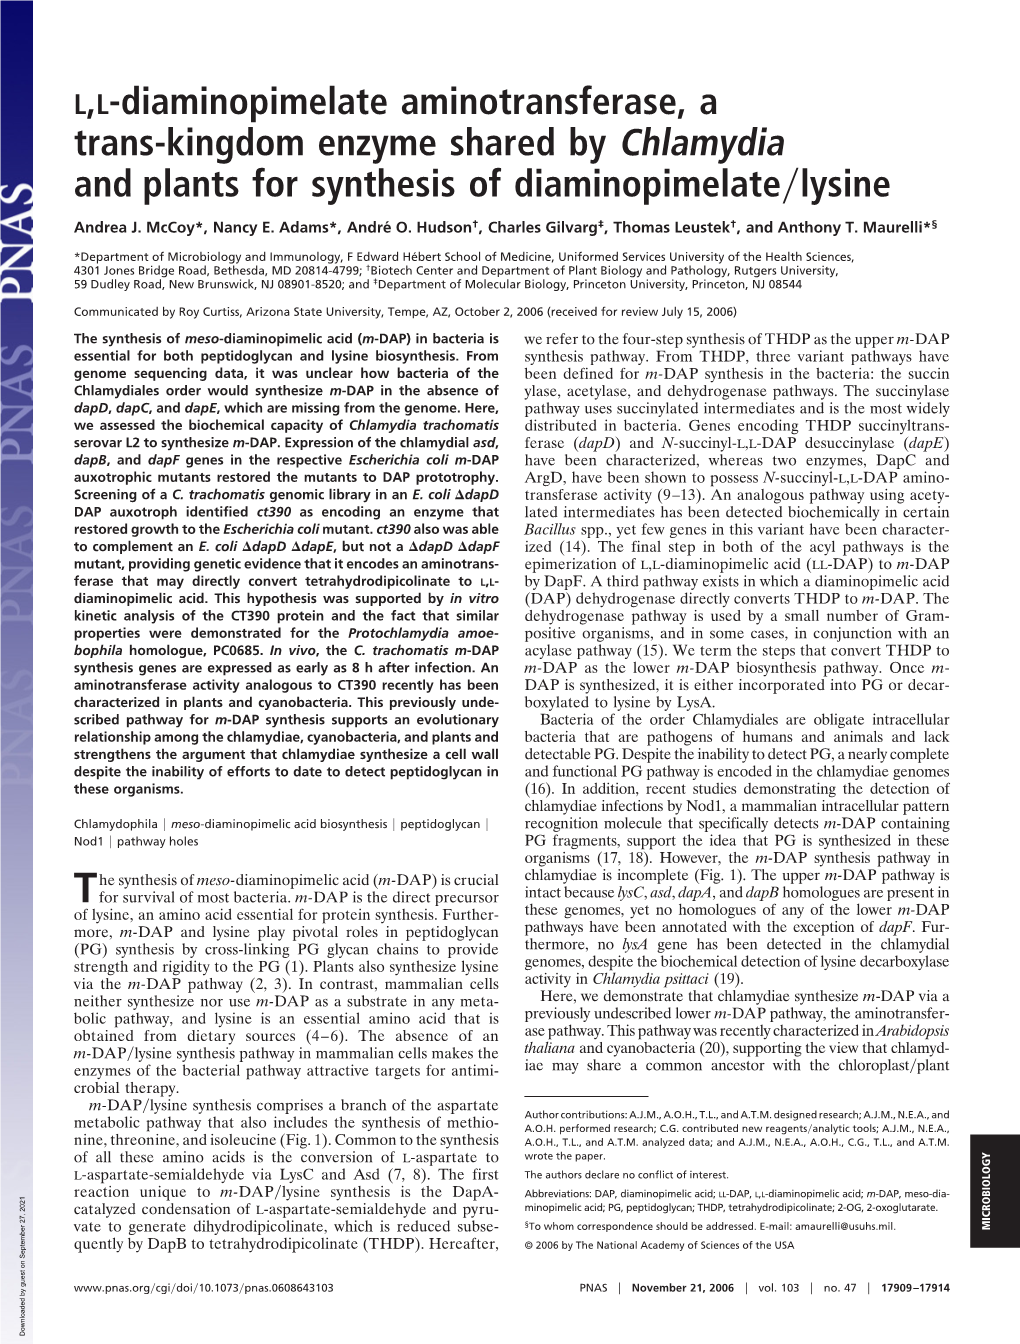 Trans-Kingdom Enzyme Shared by Chlamydia and Plants for Synthesis of Diaminopimelate͞lysine